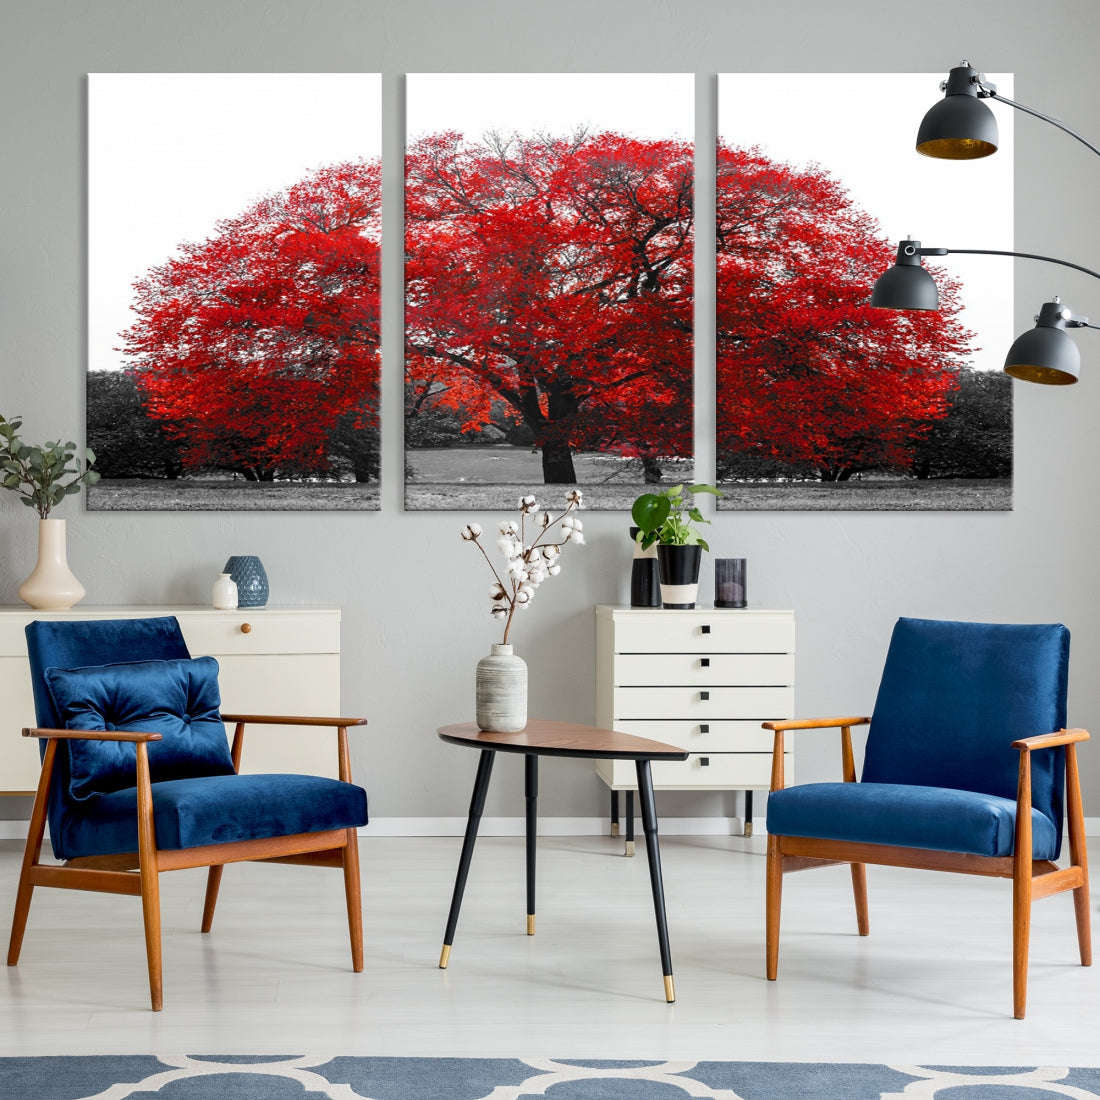 Red Leaves Autumn Tree Large Canvas Wall Art Print for Home Office Decor